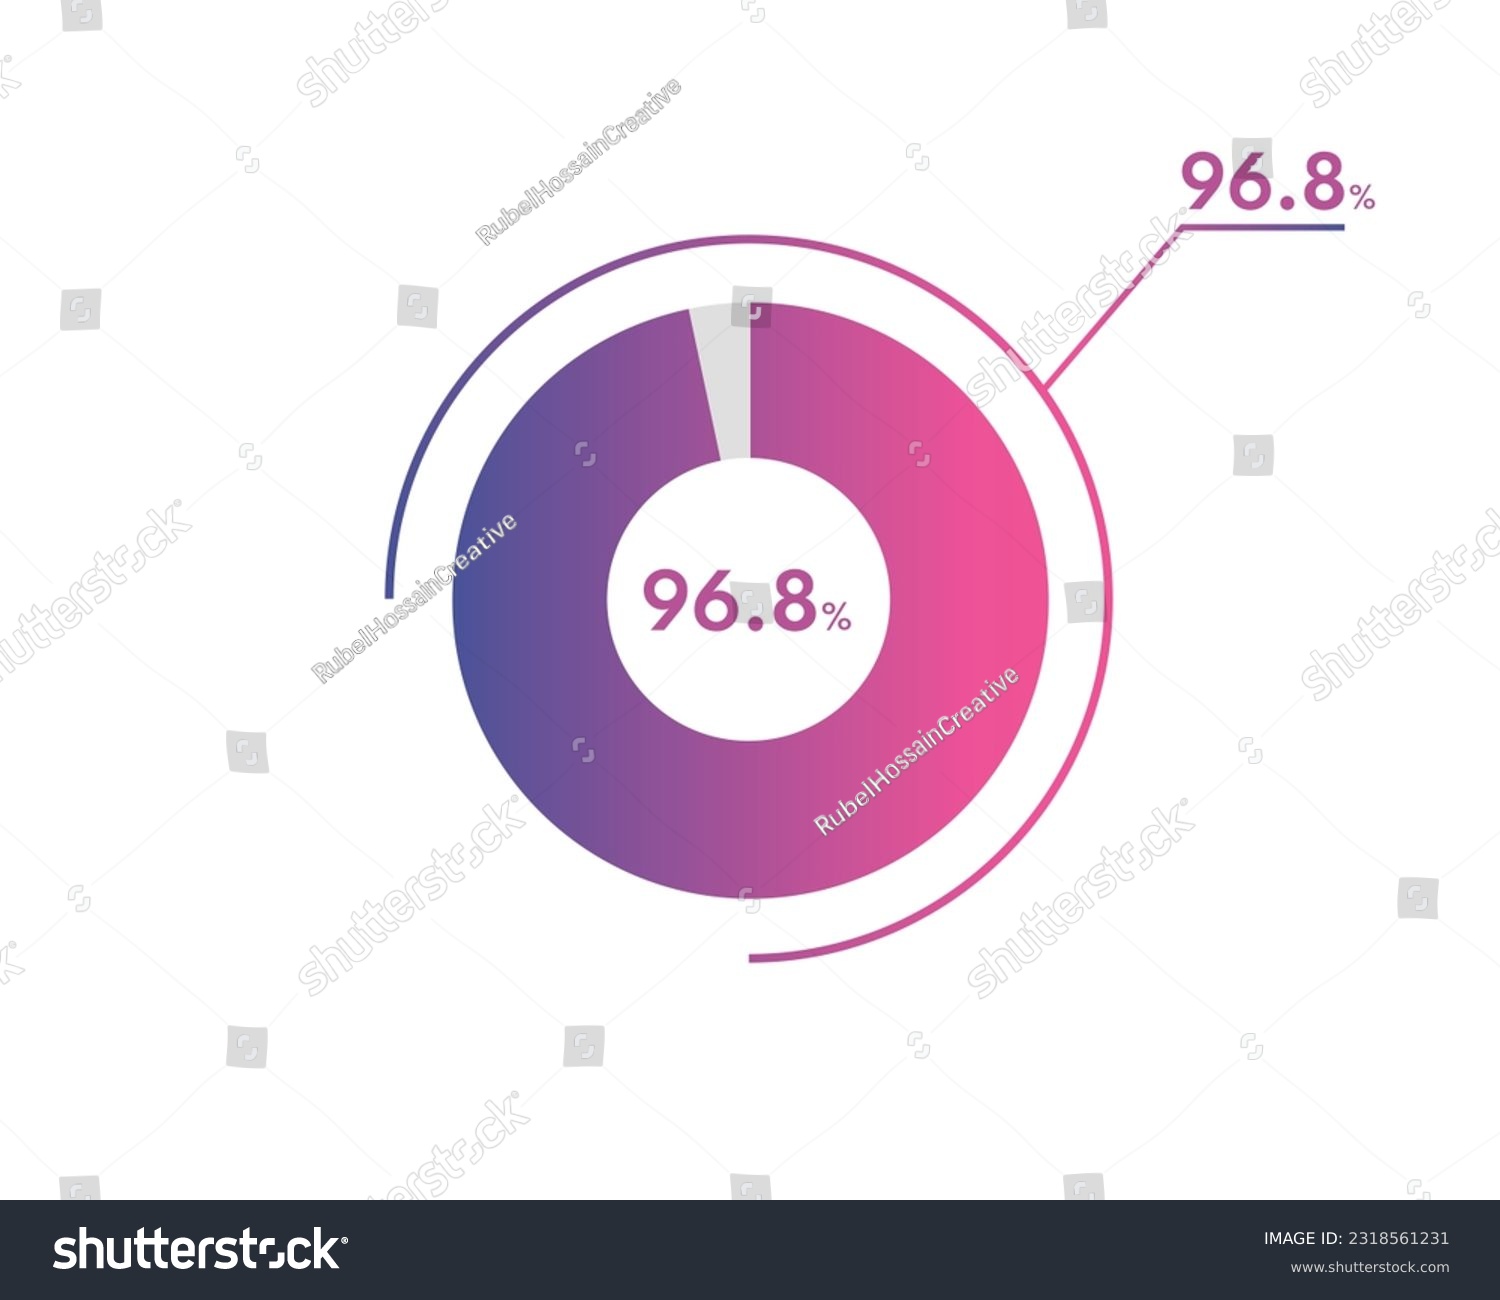 SVG of 96.8 Percentage circle diagrams Infographics vector, circle diagram business illustration, Designing the 96.8% Segment in the Pie Chart. svg